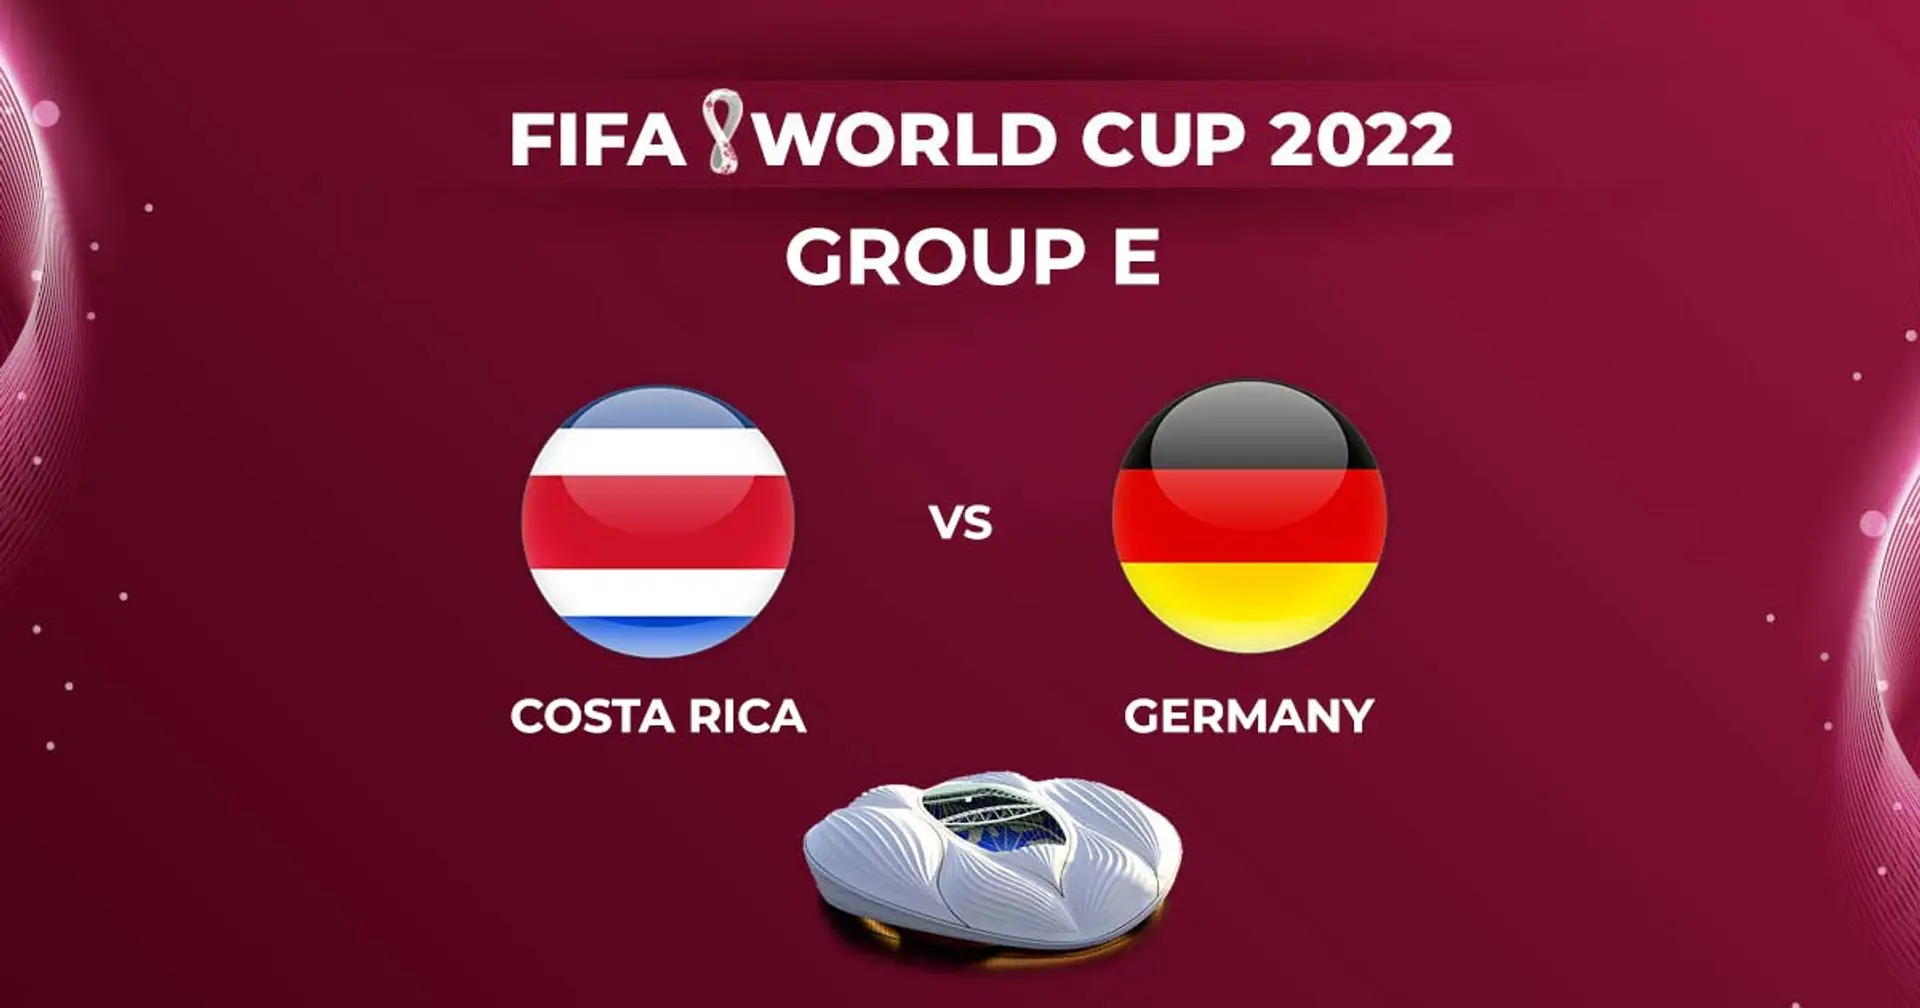 Costa Rica vs Germany: Official team lineups for the World Cup clash revealed